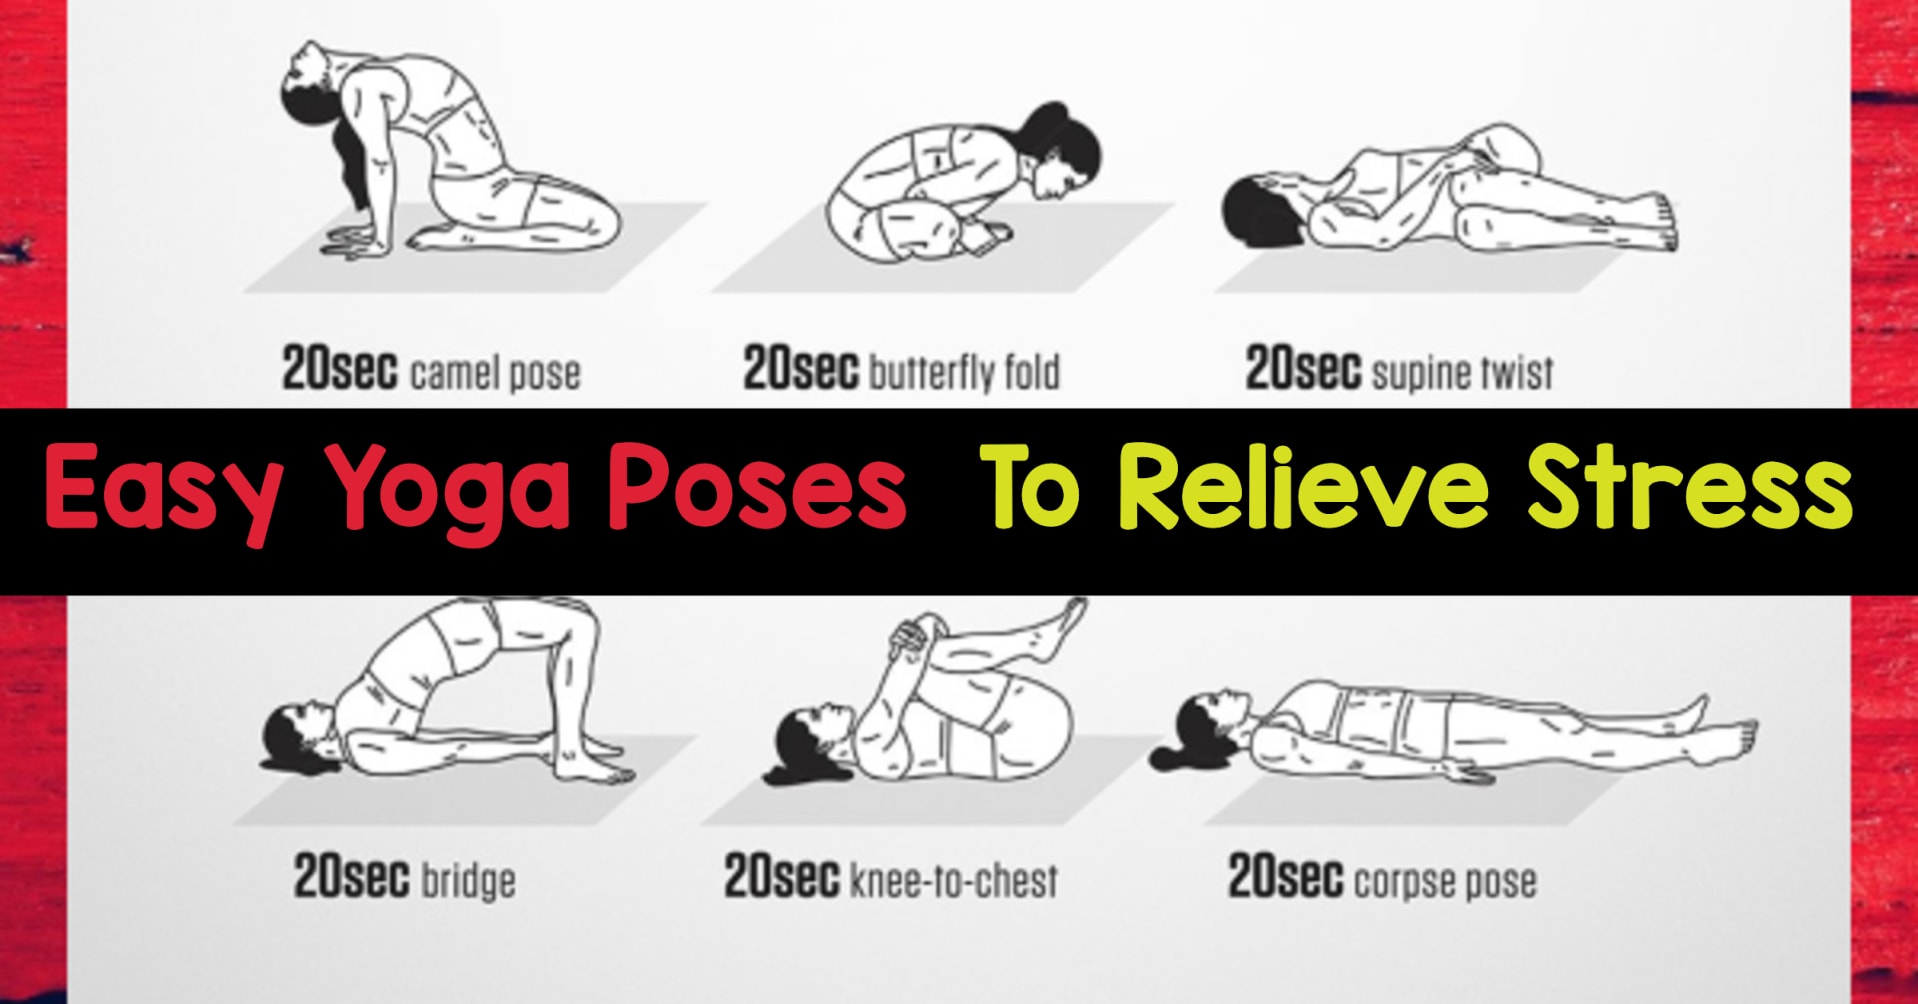 Easy Yoga Poses and Yoga Routines to reduce stress and sleep better - could be fun and easy yoga poses for two!